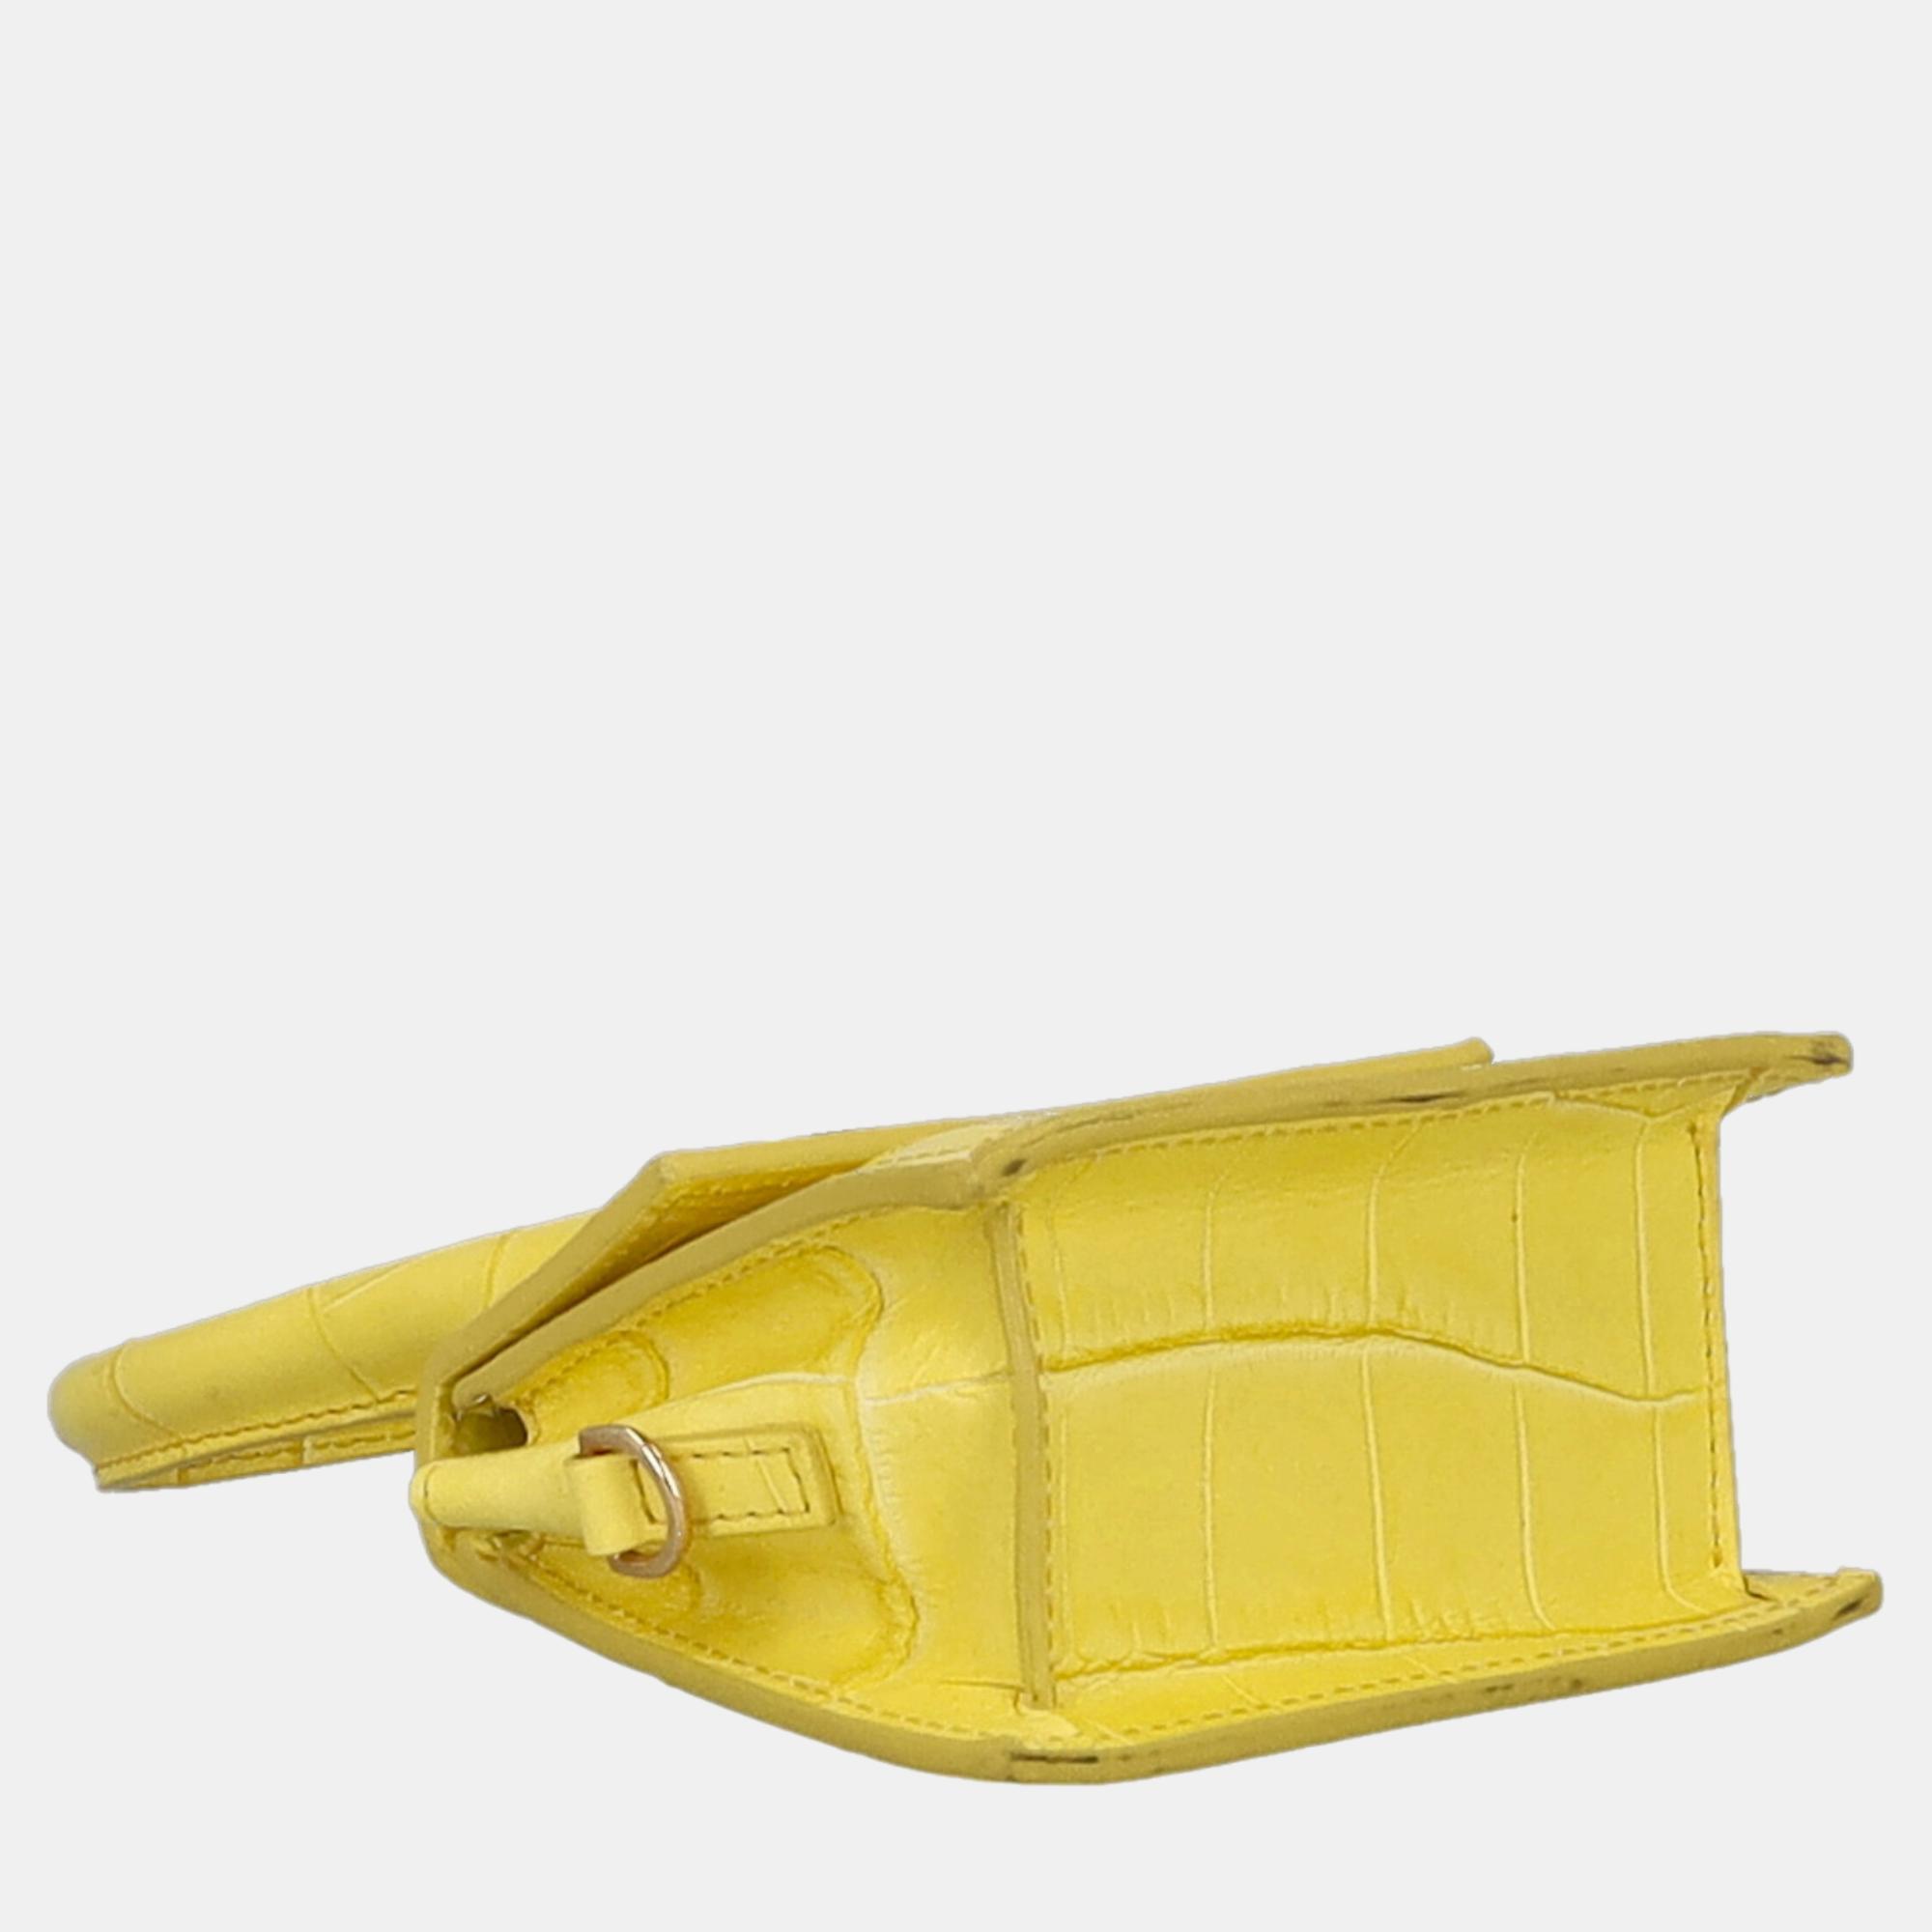 Jacquemus  Women's Leather Clutch Bag - Yellow - One Size